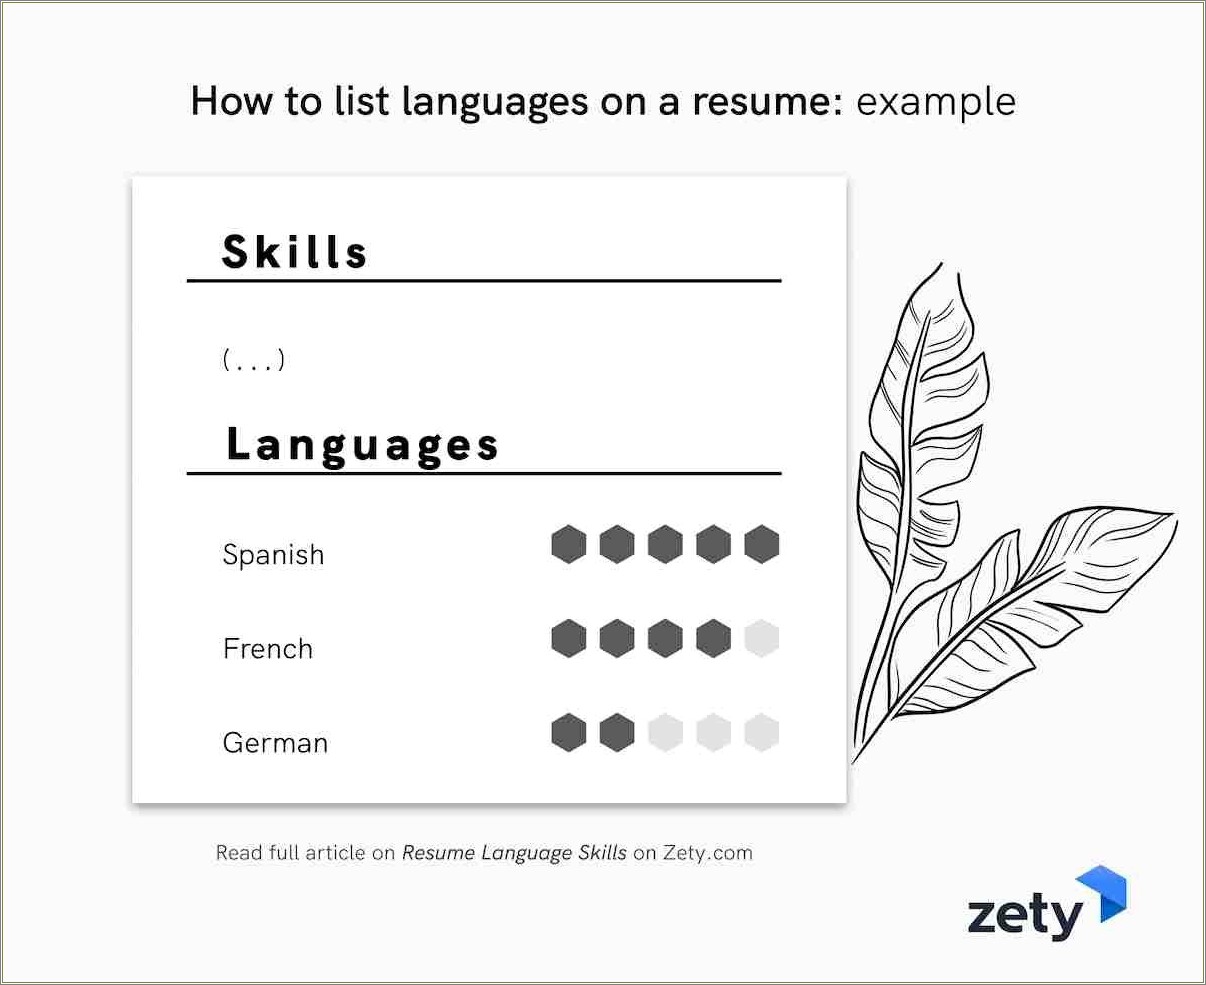 Do Languages Go Under Skills In A Resume